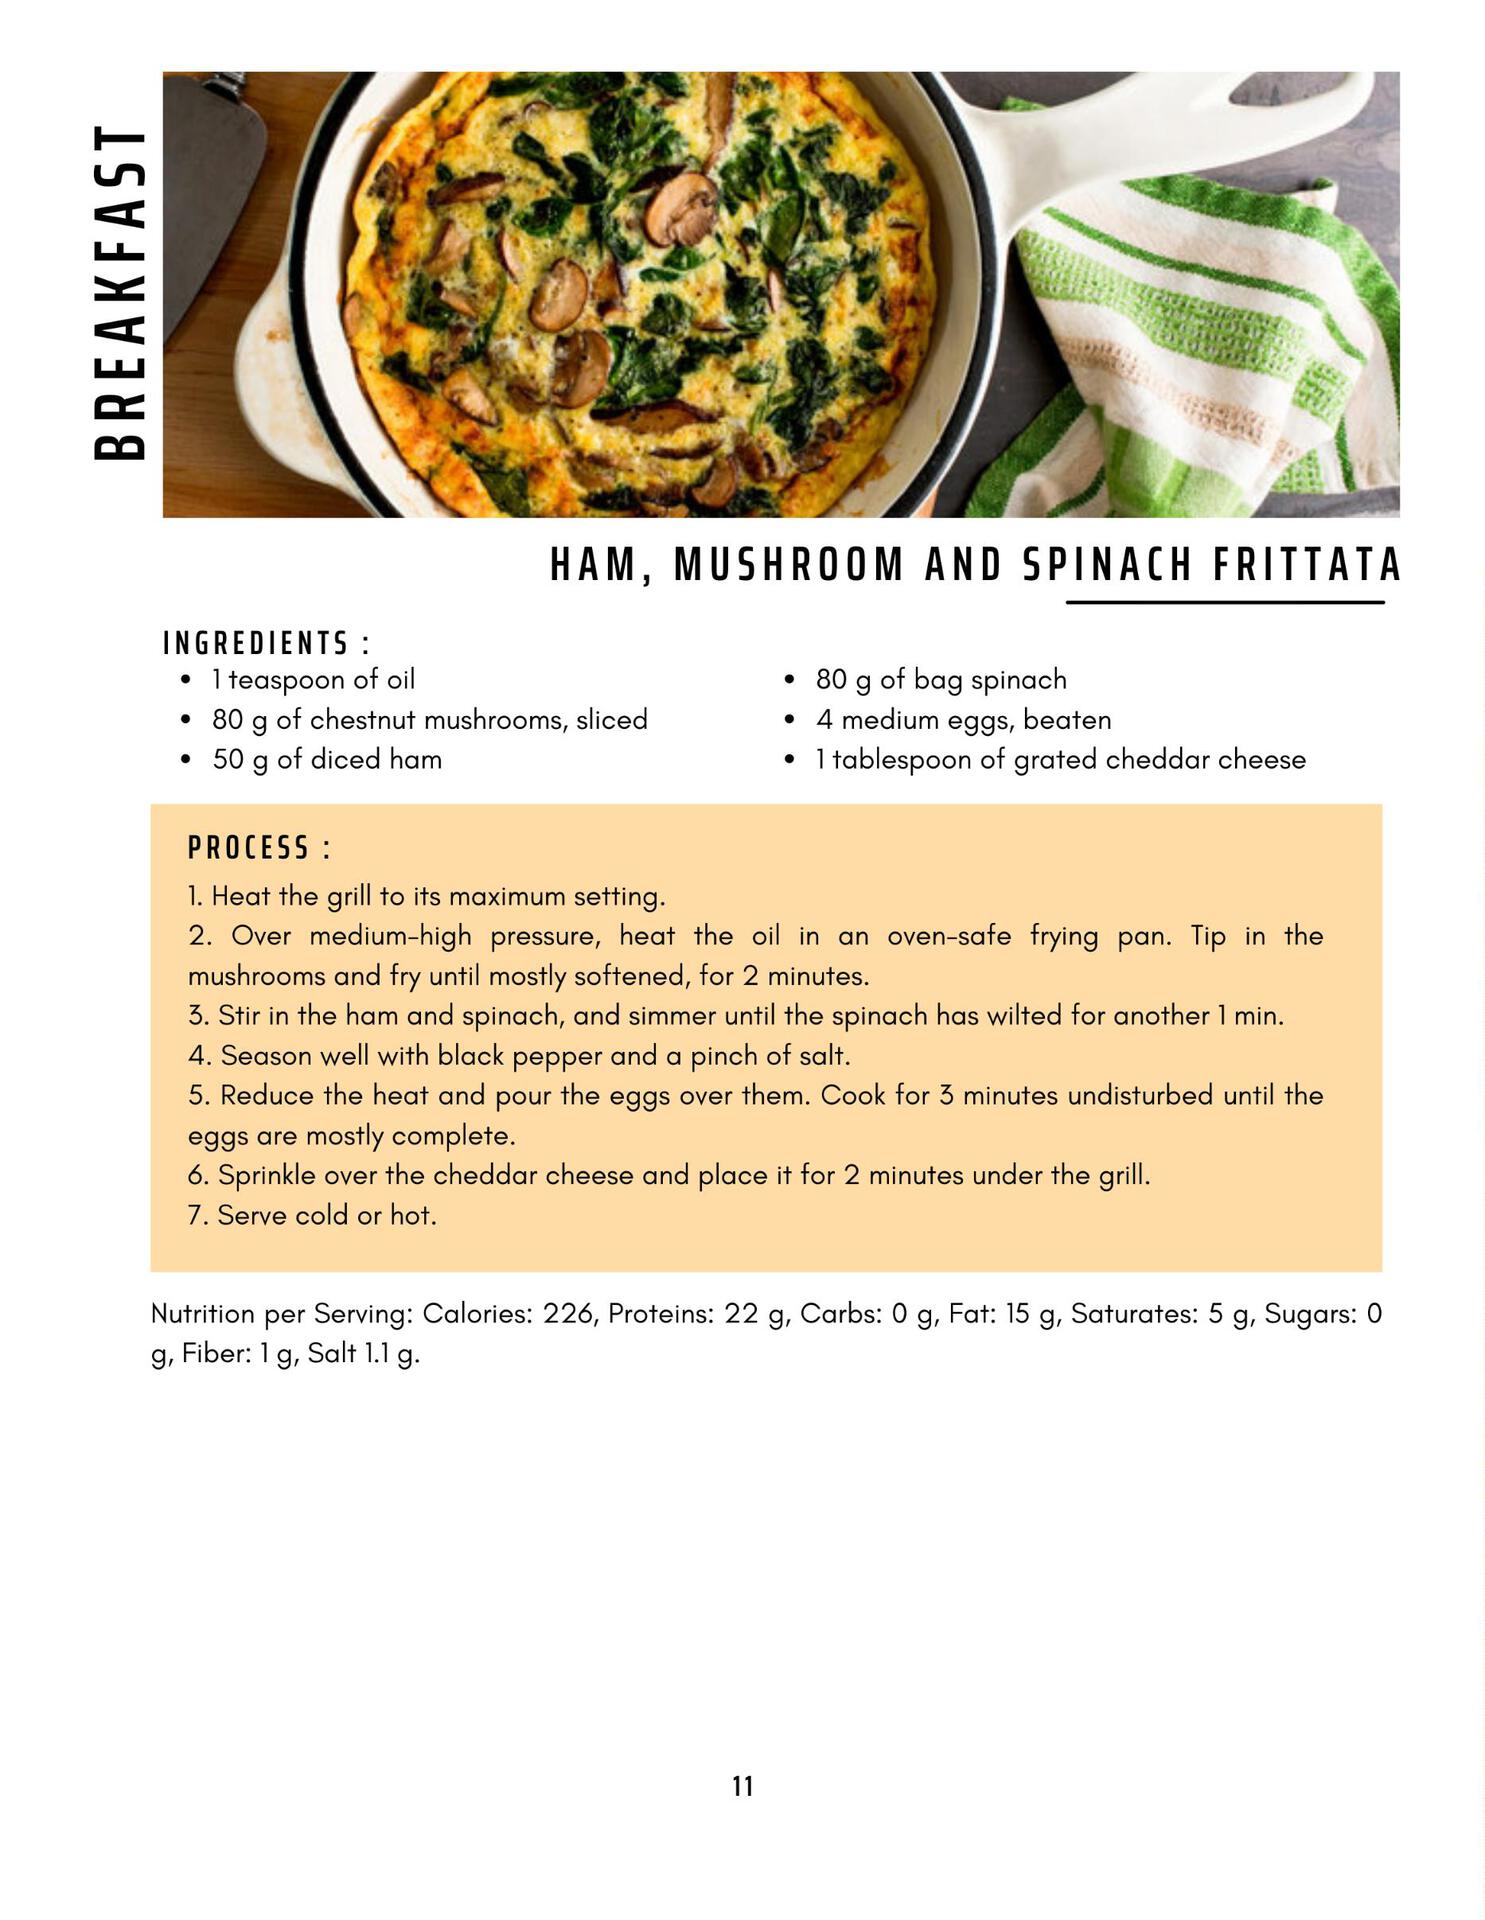 The New Lean and Green Diet Cookbook for Beginners 150 Quick Easy and Mouthwatering Recipes for Beginners with Full Color Image to Heal and Nourish Your Body from the Inside Out - photo 12